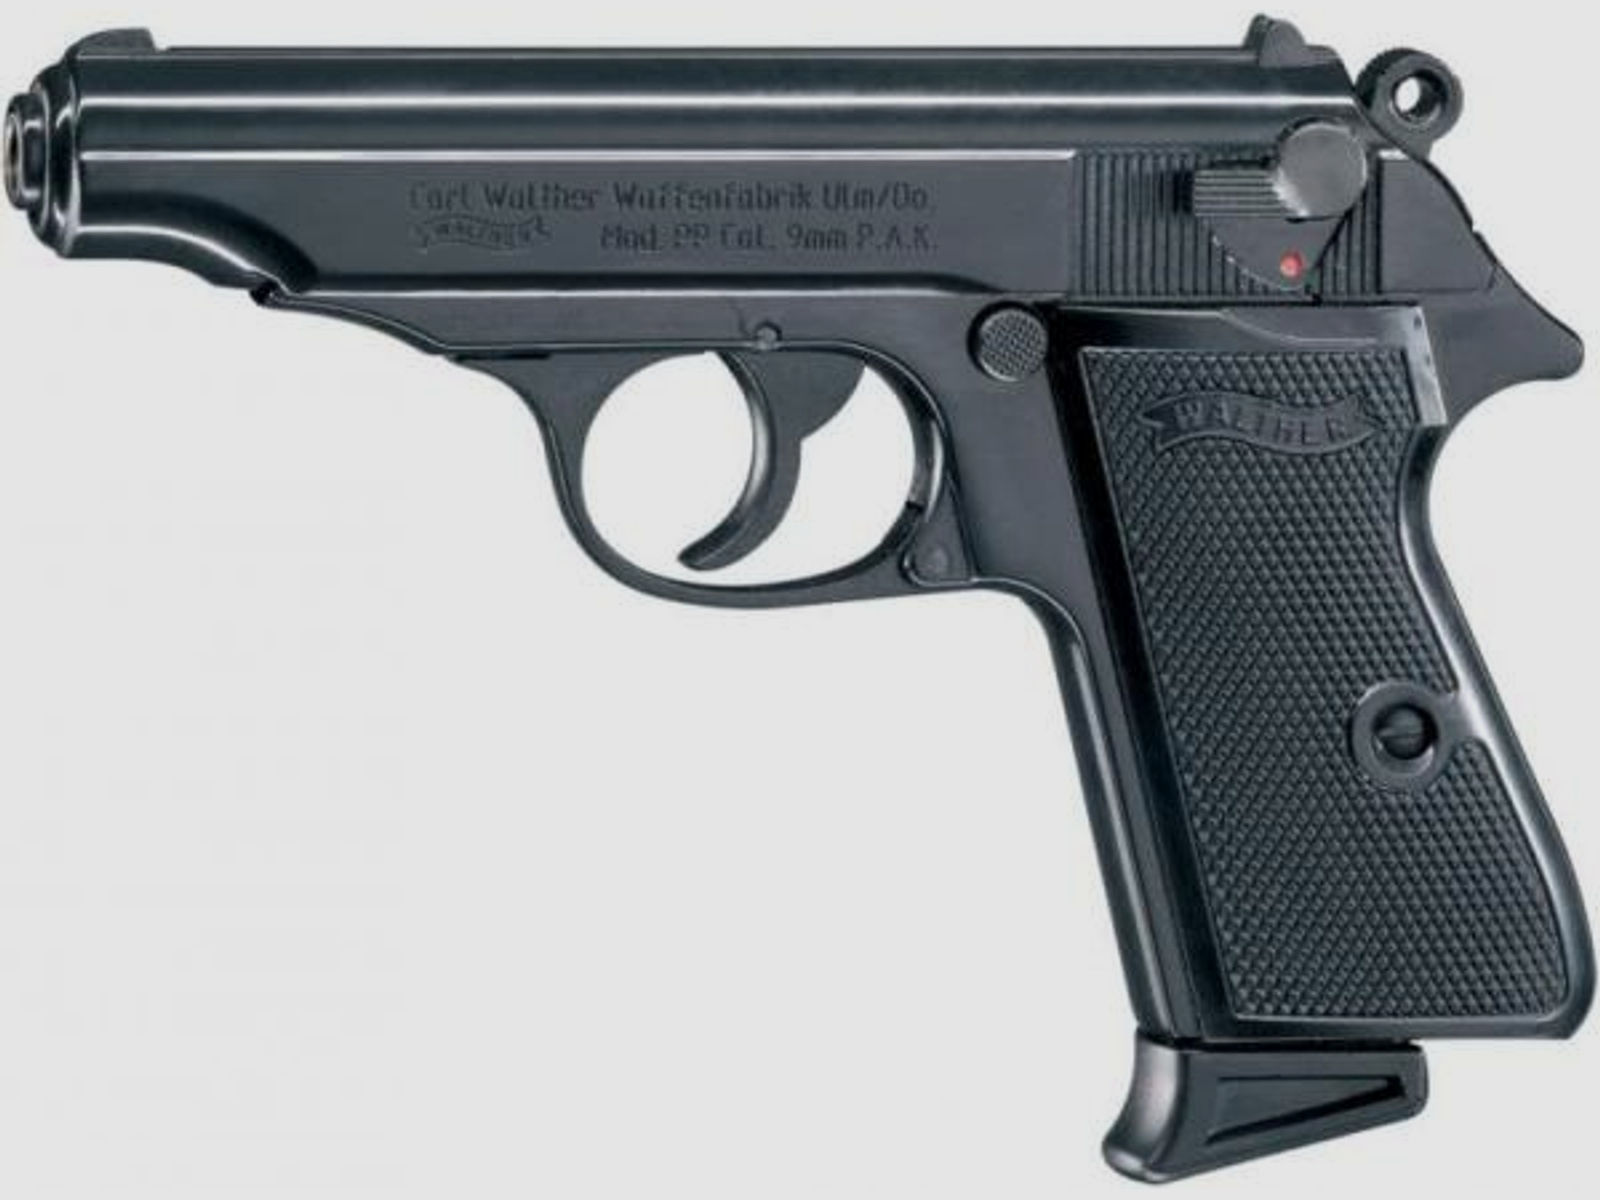 WALTHER Gaspistole (SRS) PP Kal. 9mm P.A.